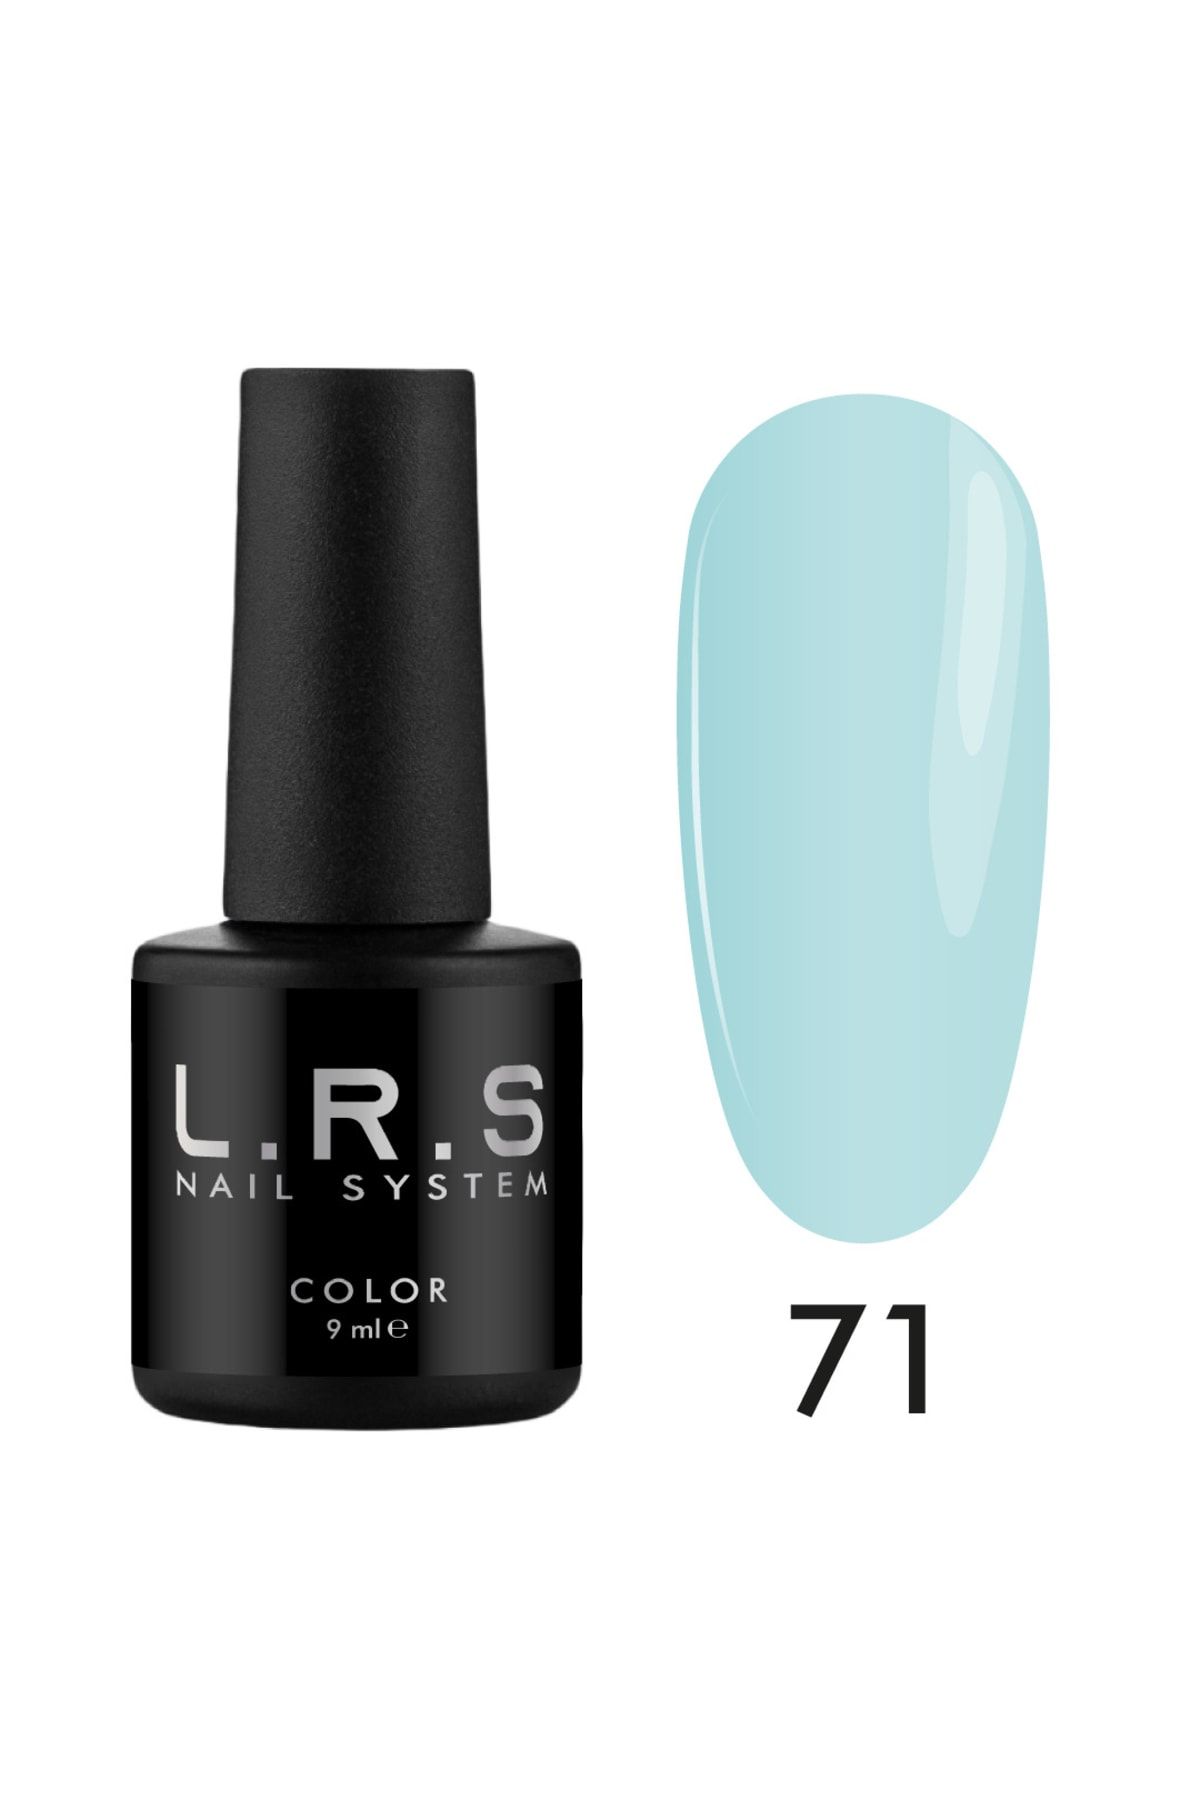 PNB Lrs Nail System 9ml Color 71